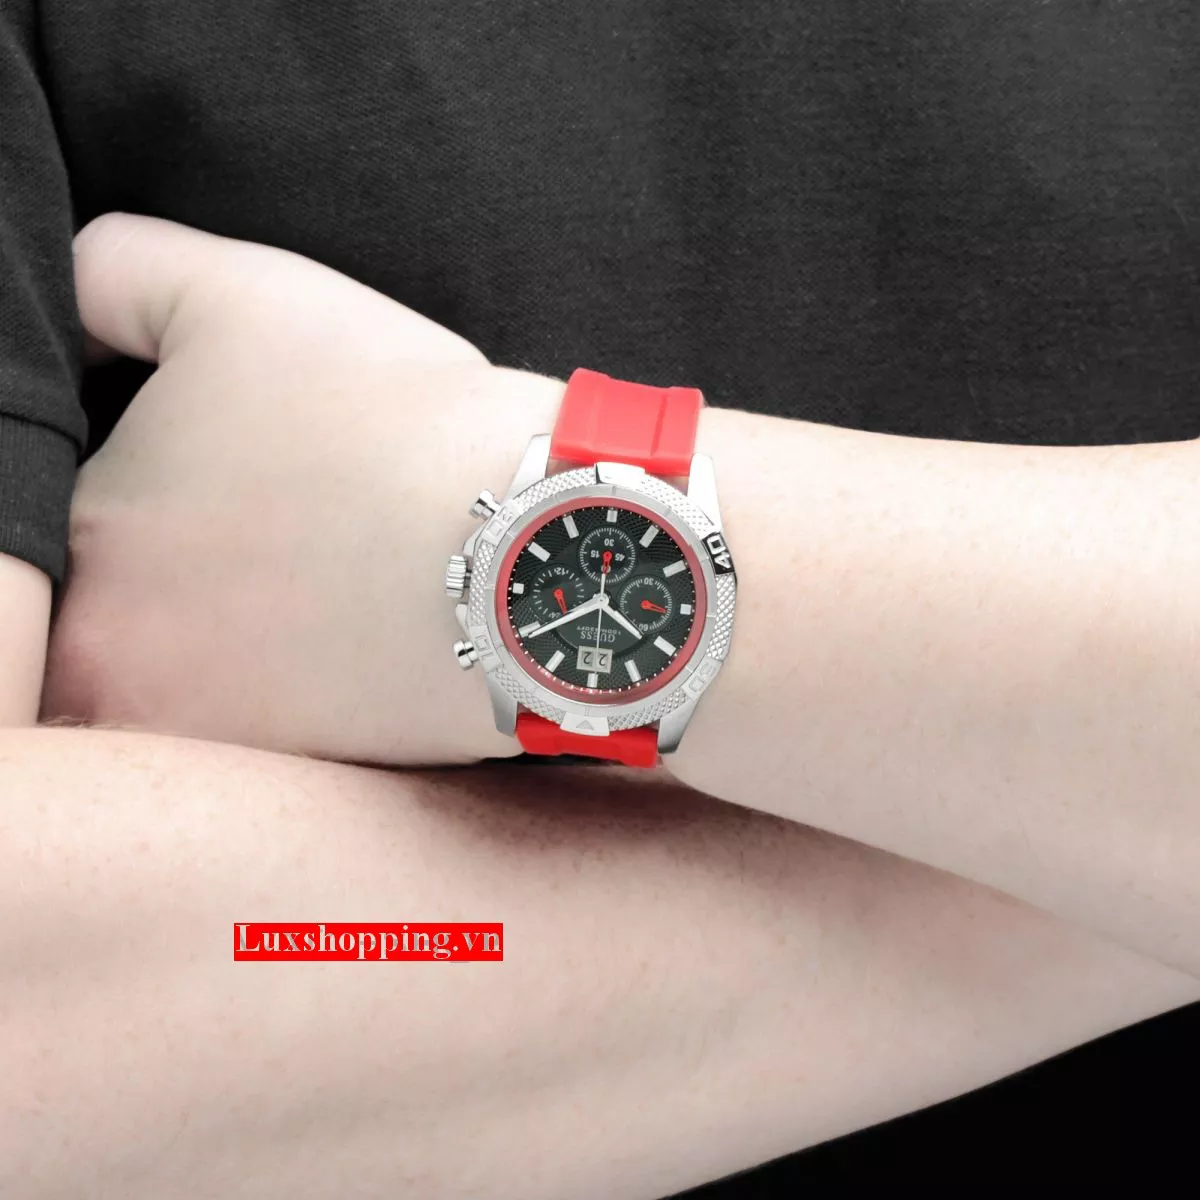 Guess Limited Edition Red Strap Watch 50mm